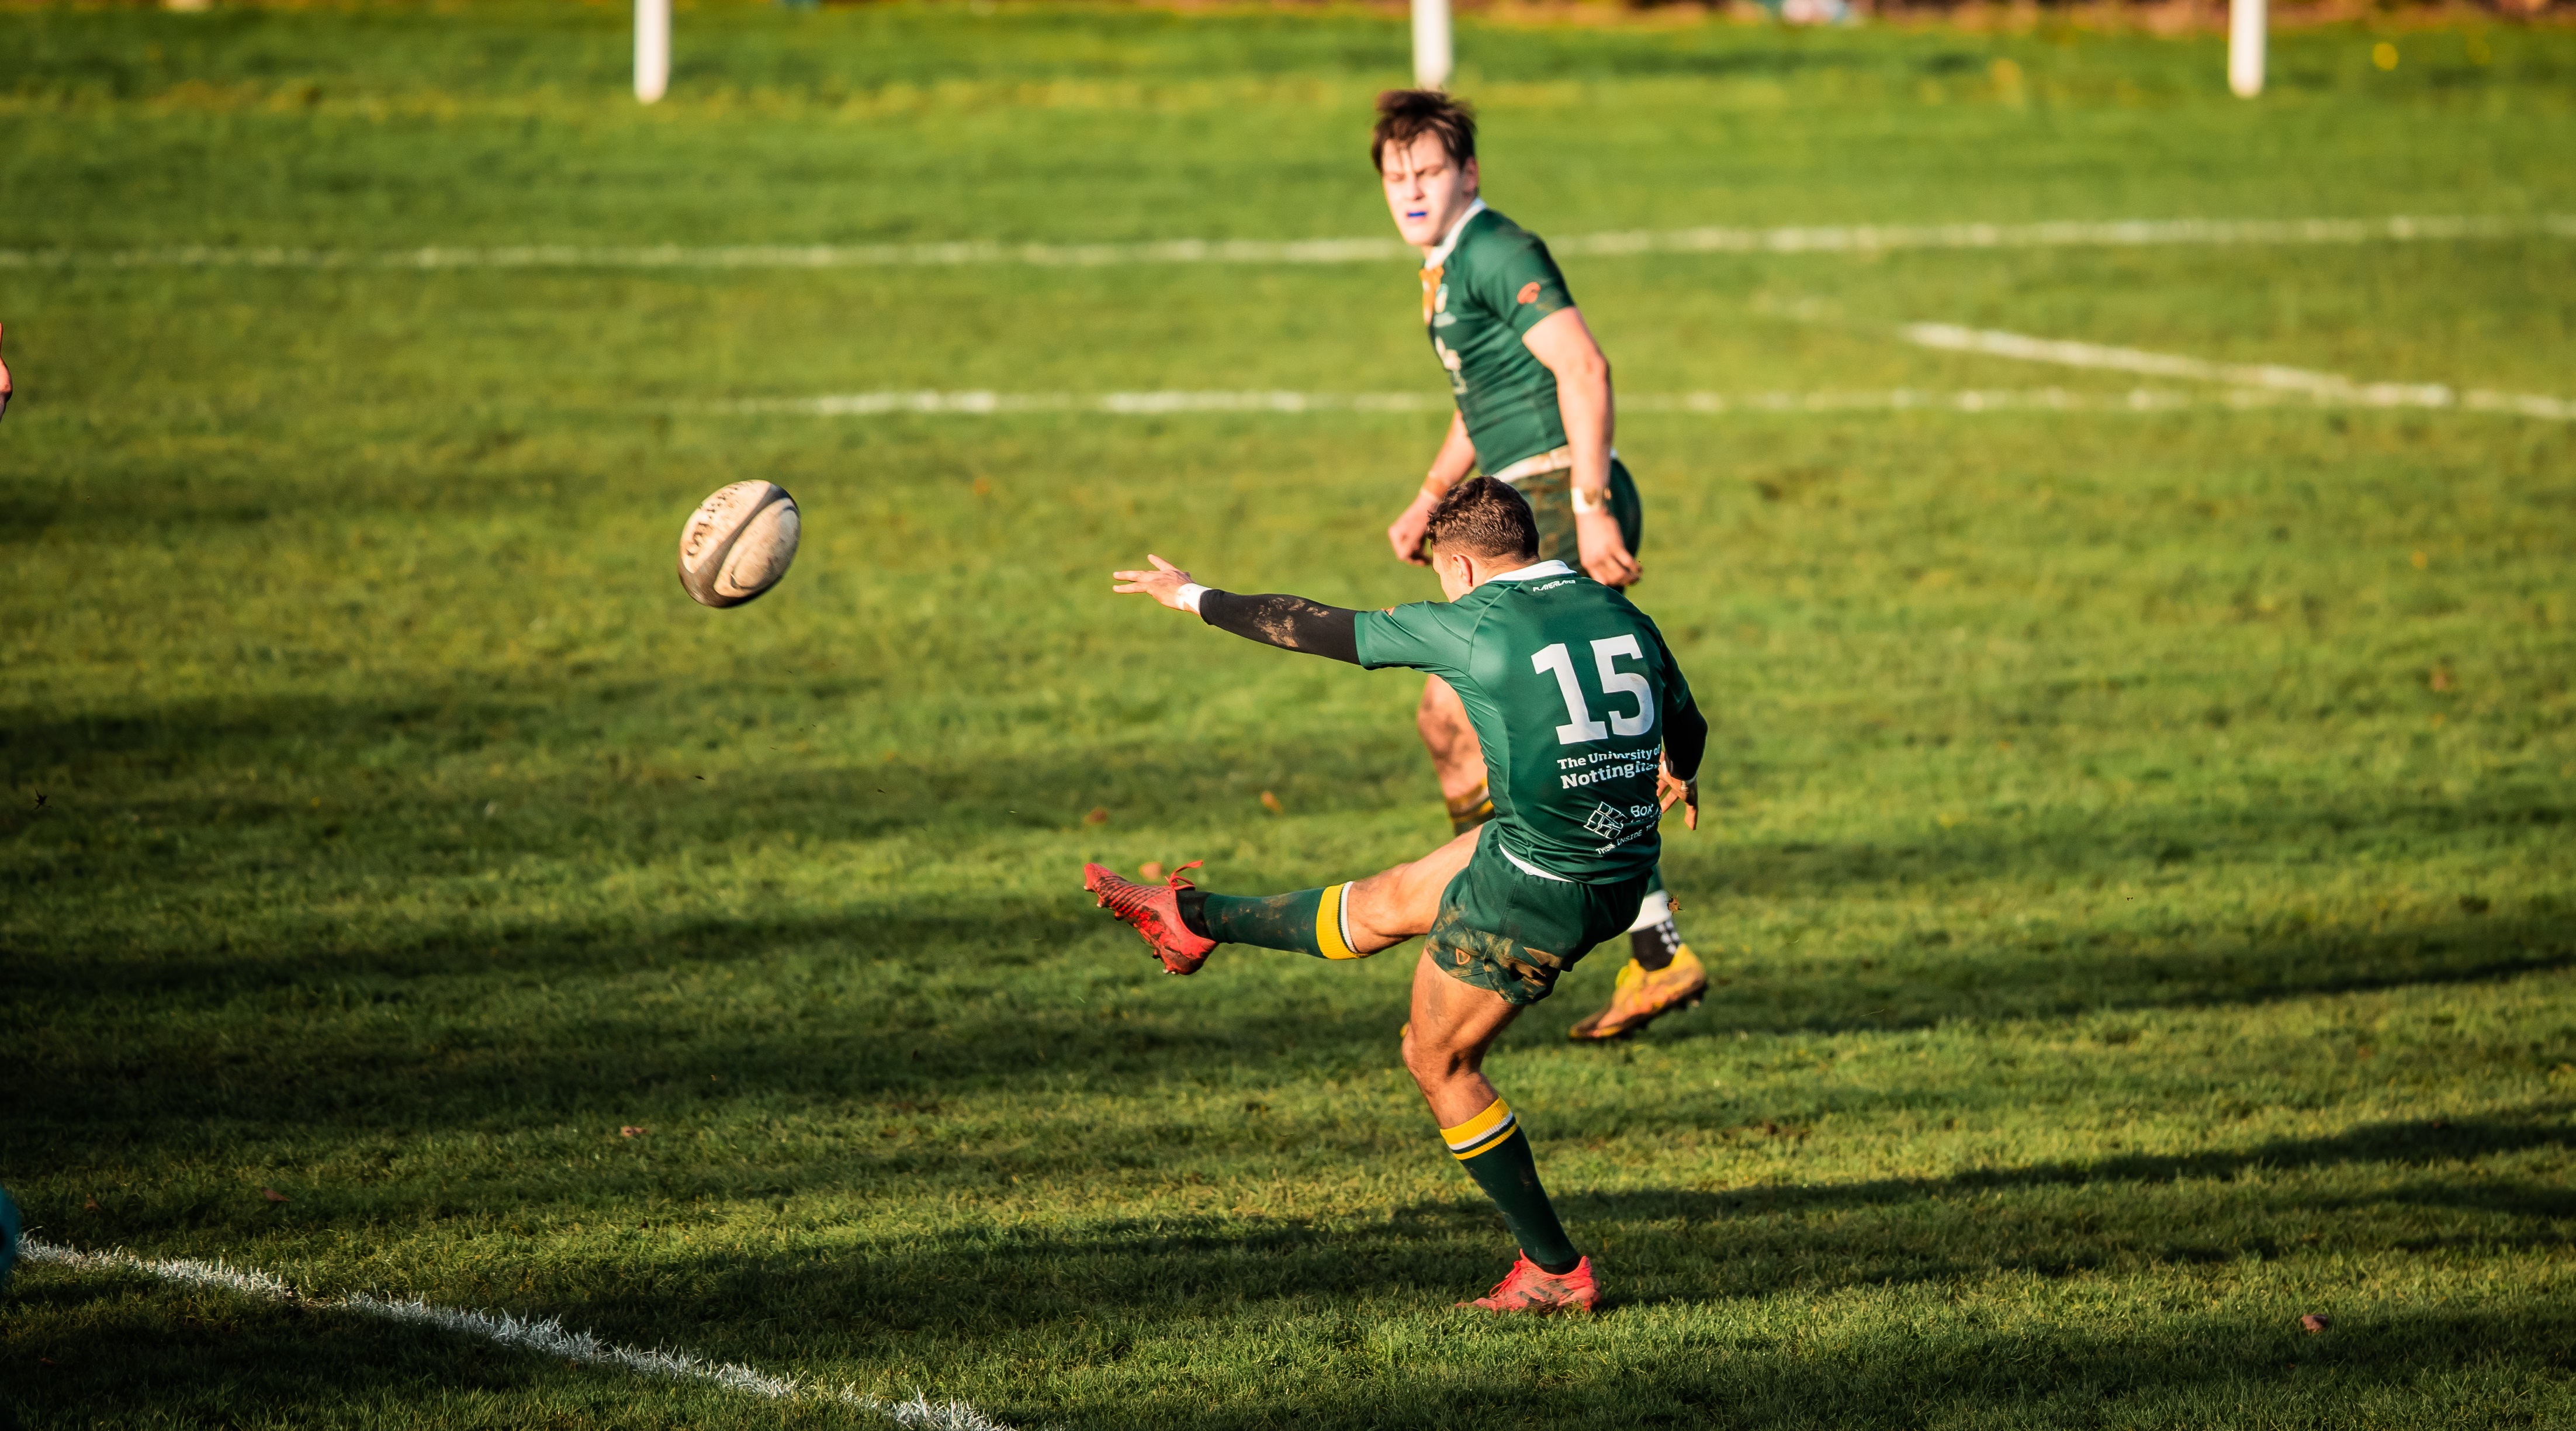 BUCS Super Rugby action at University of Nottingham